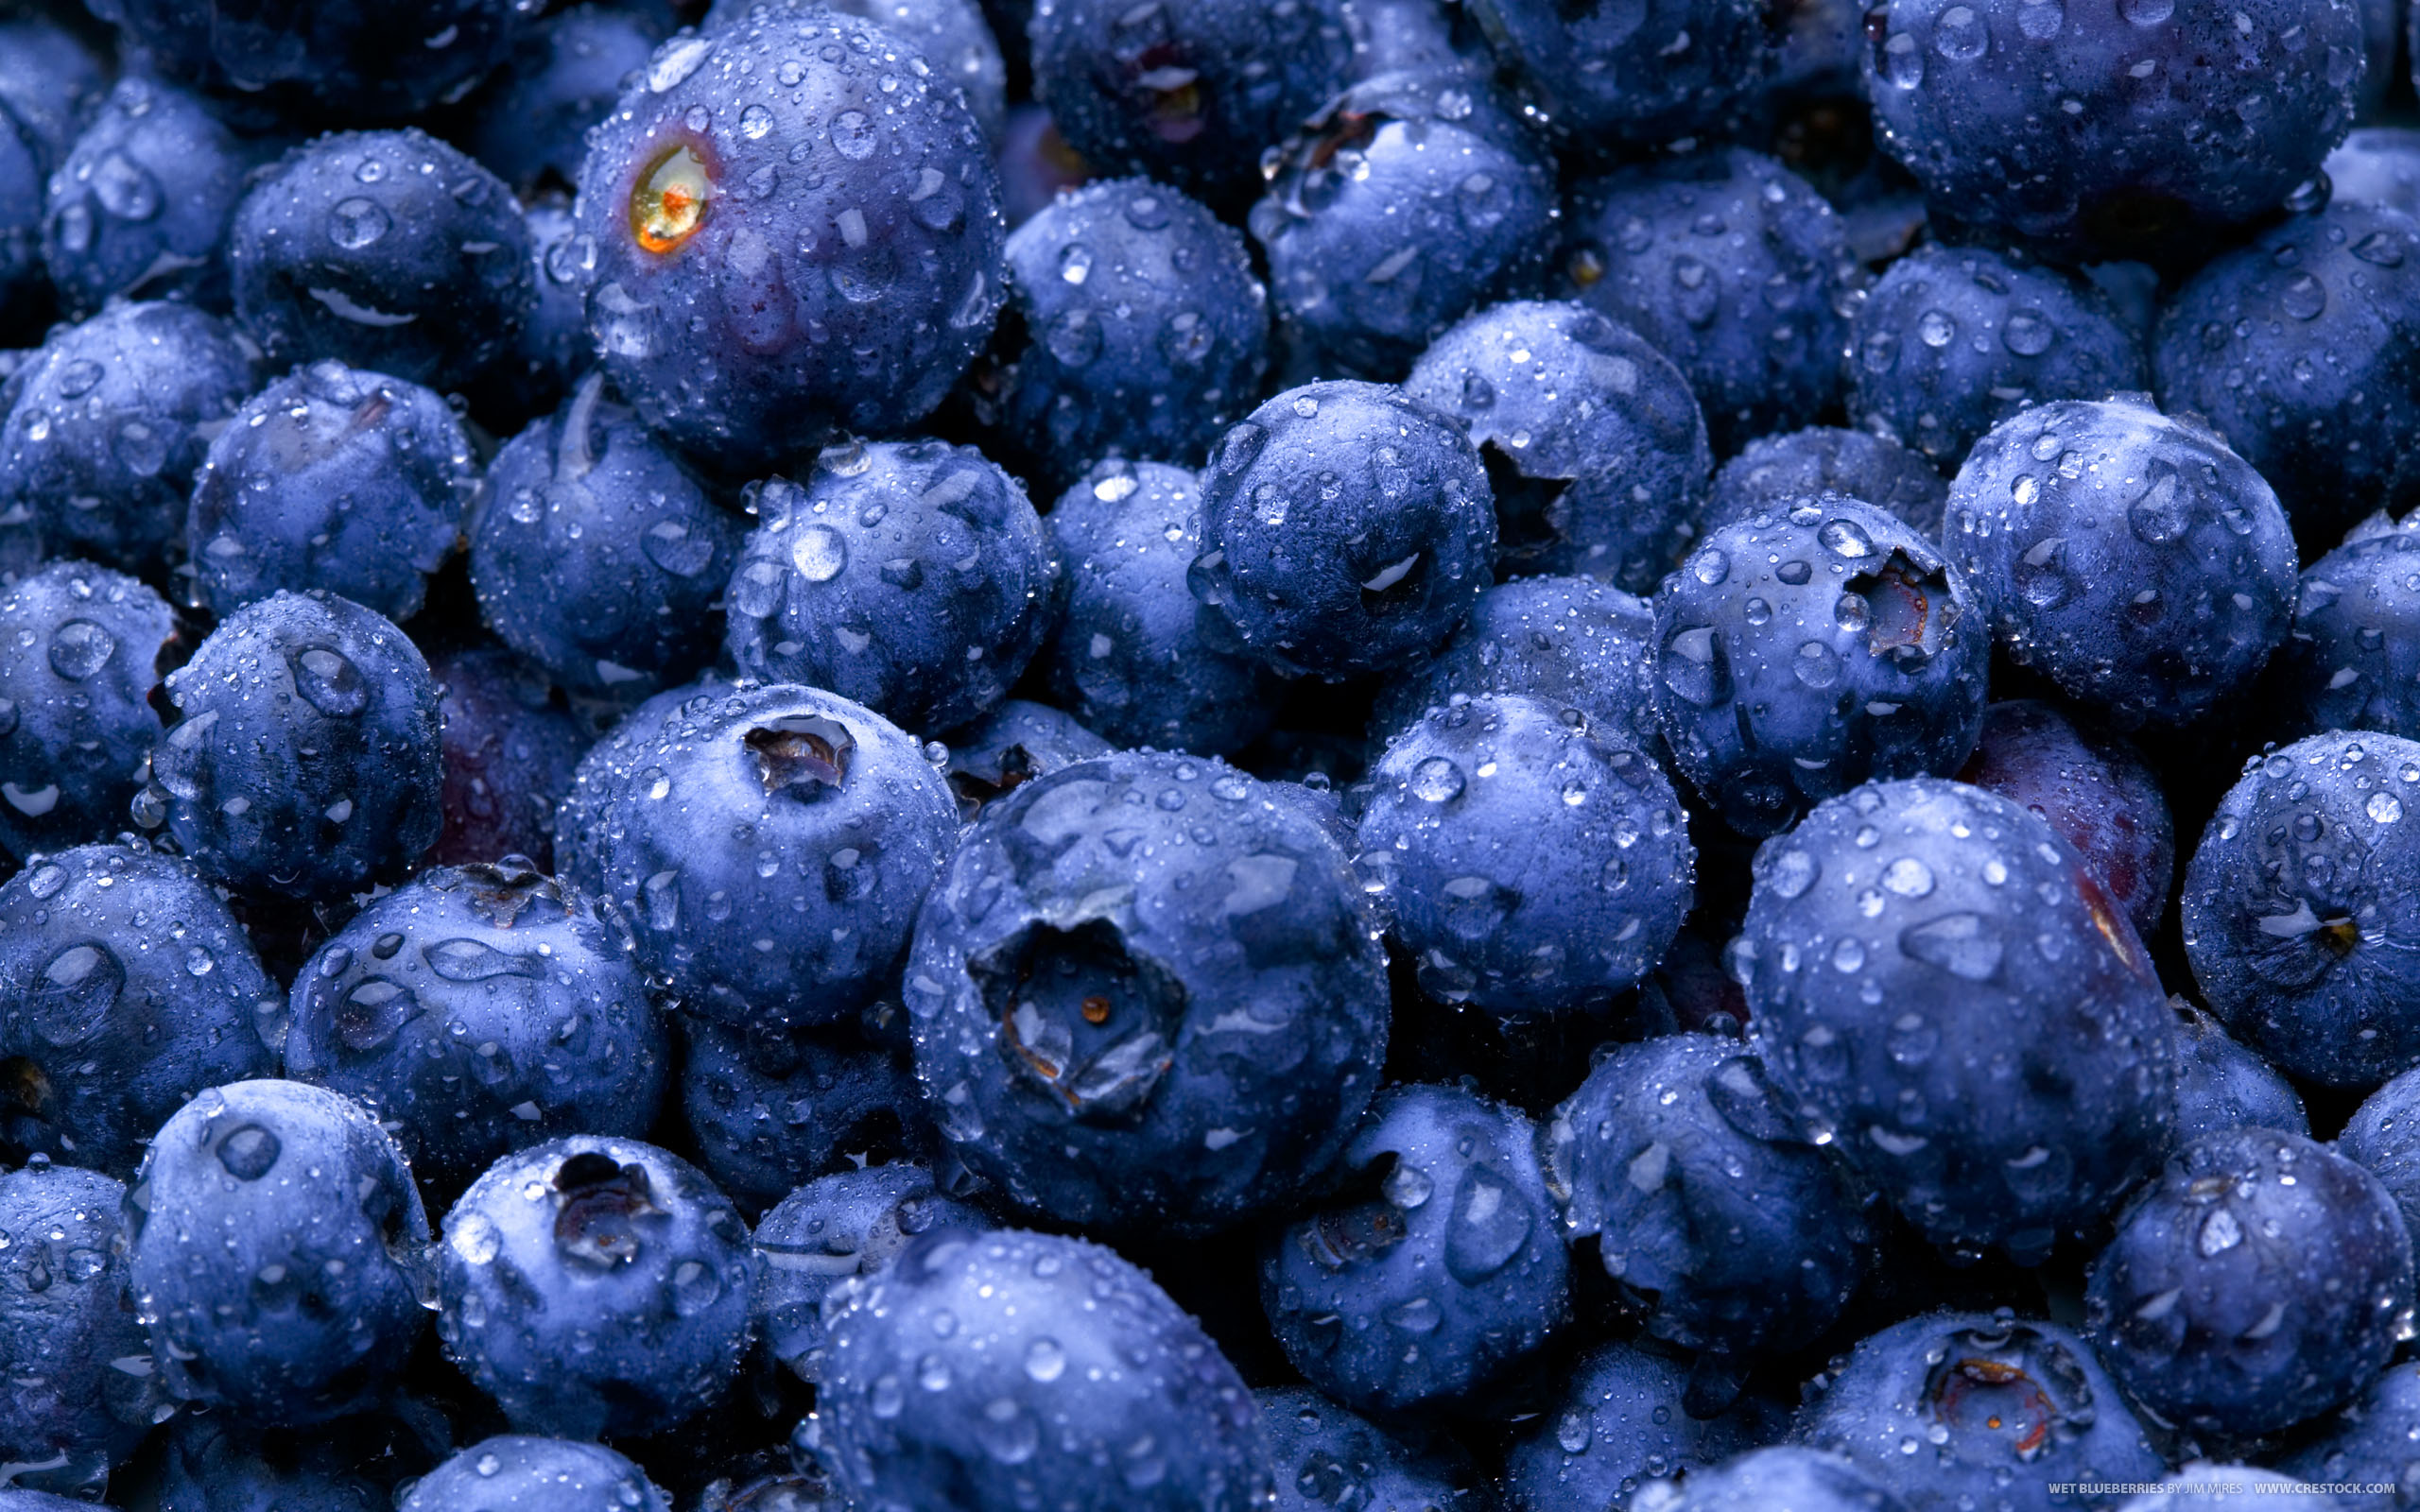 Get your Organic Blueberries tomorrow (6/17) for $1.99 at Whole Foods